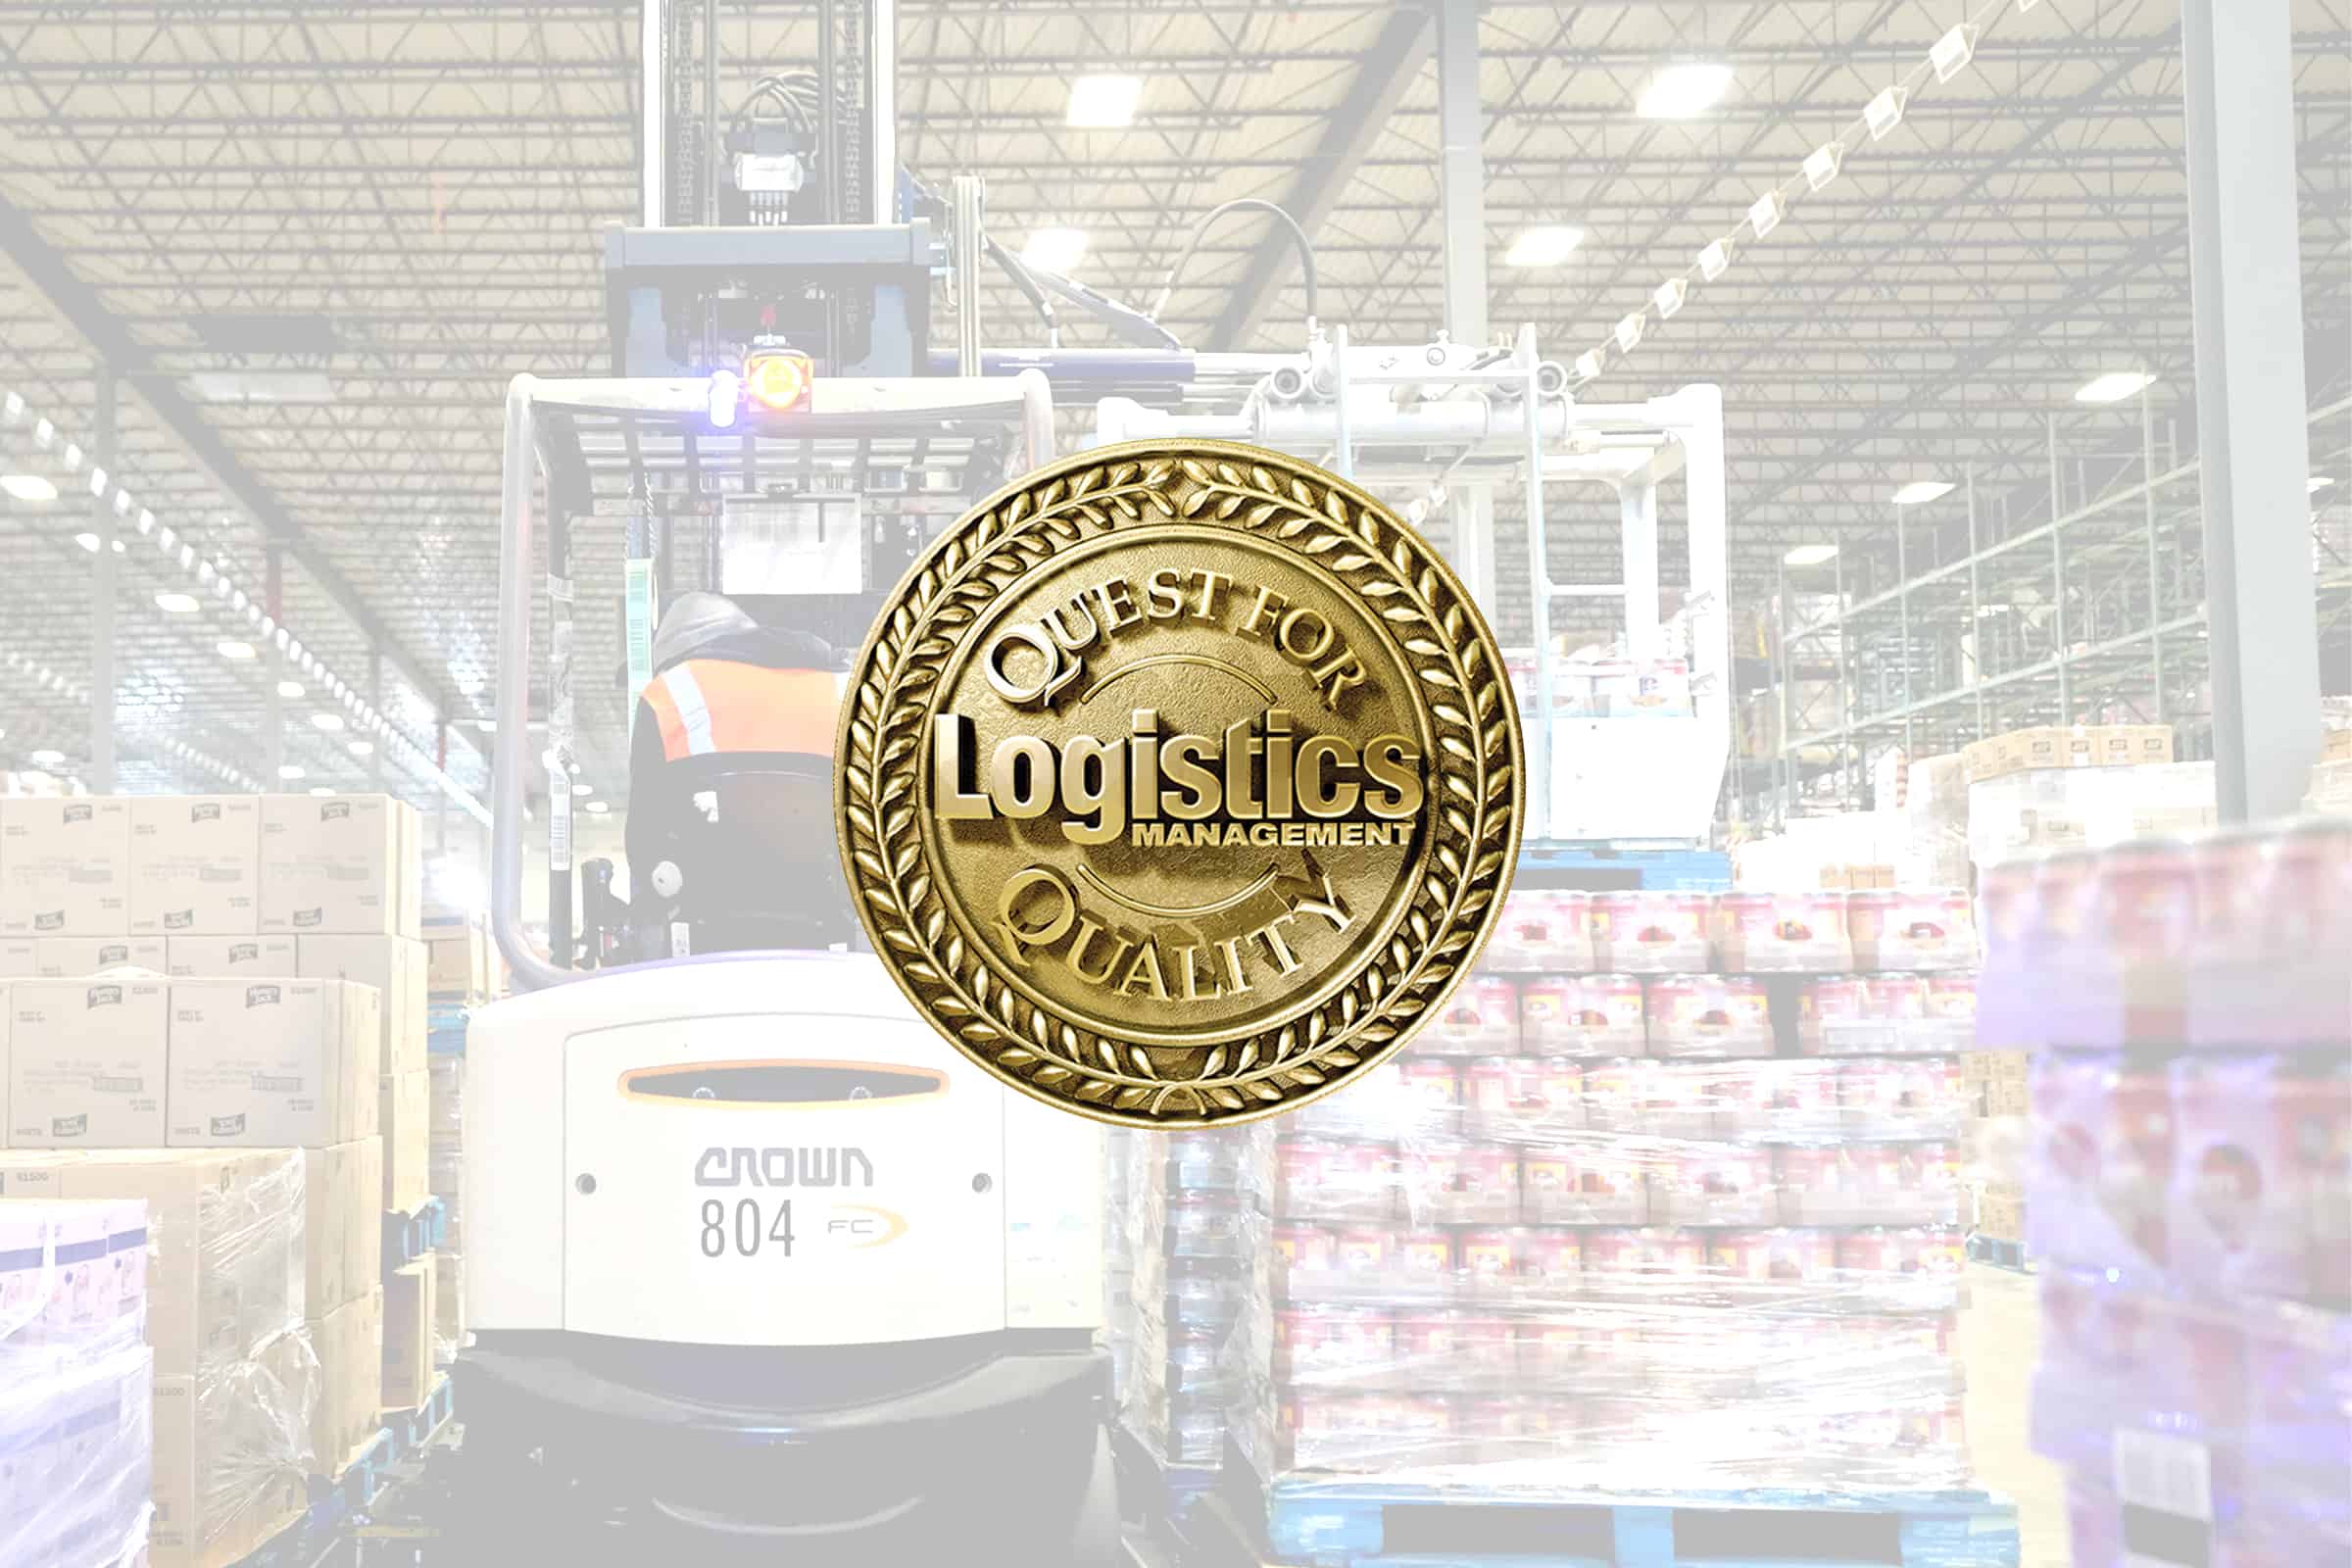 cj logistics america, 3pl, quest for quality, warehouse management, supply chain